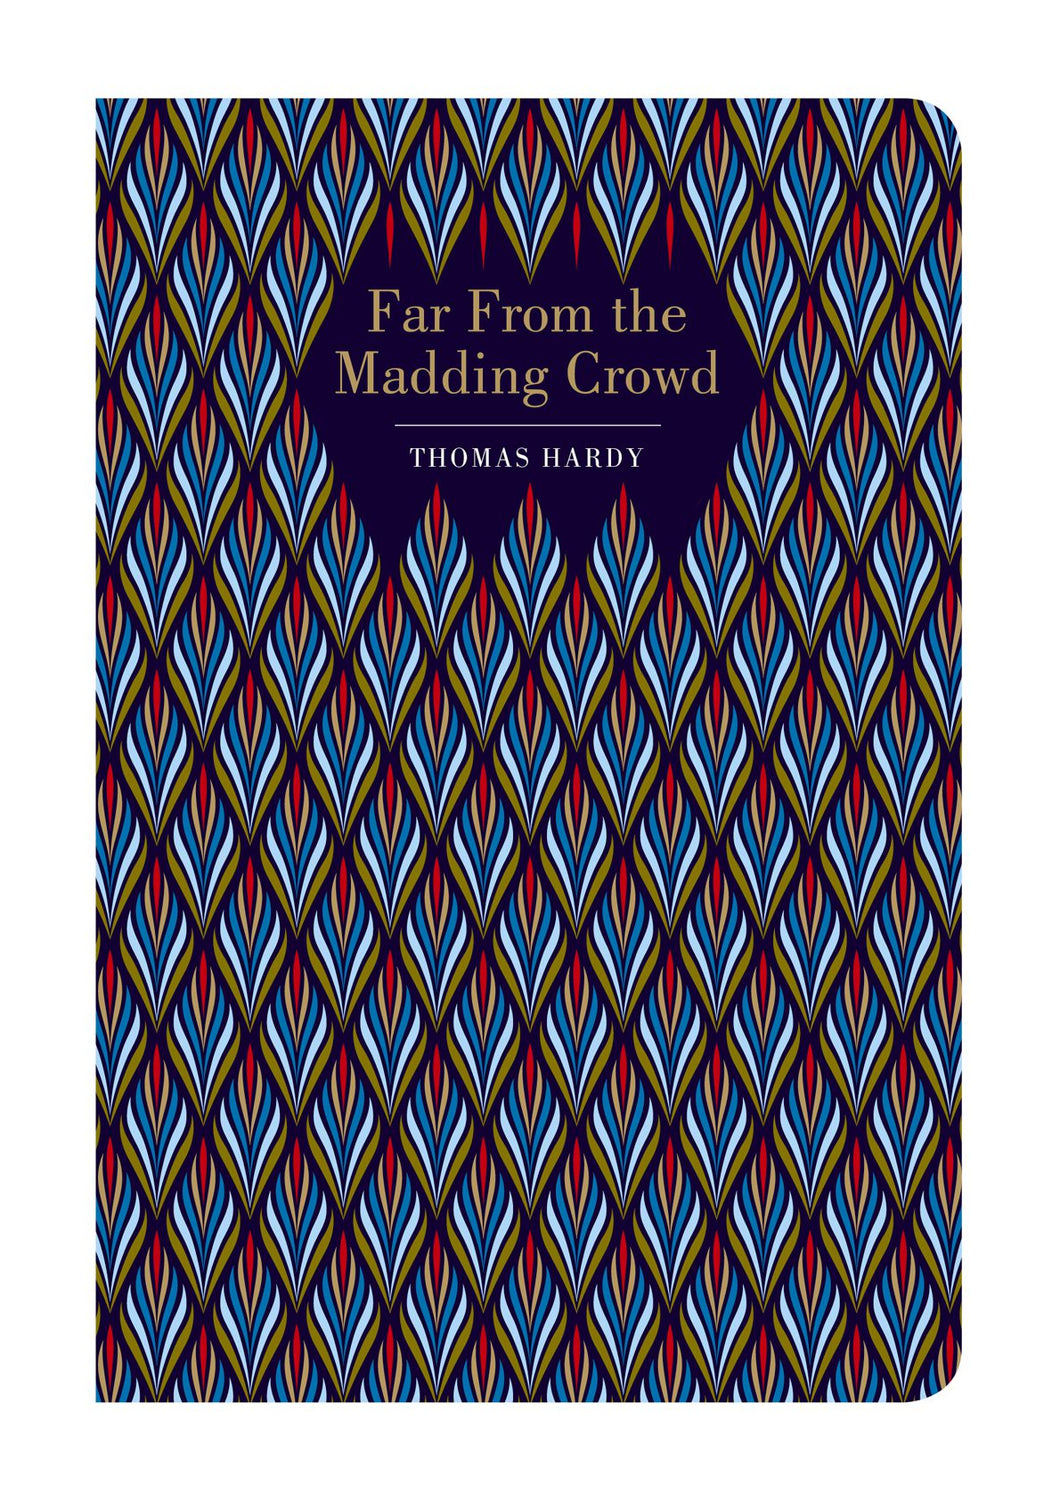 Far From a Madding Crowd by Thomas Hardy (Chiltern Classics)